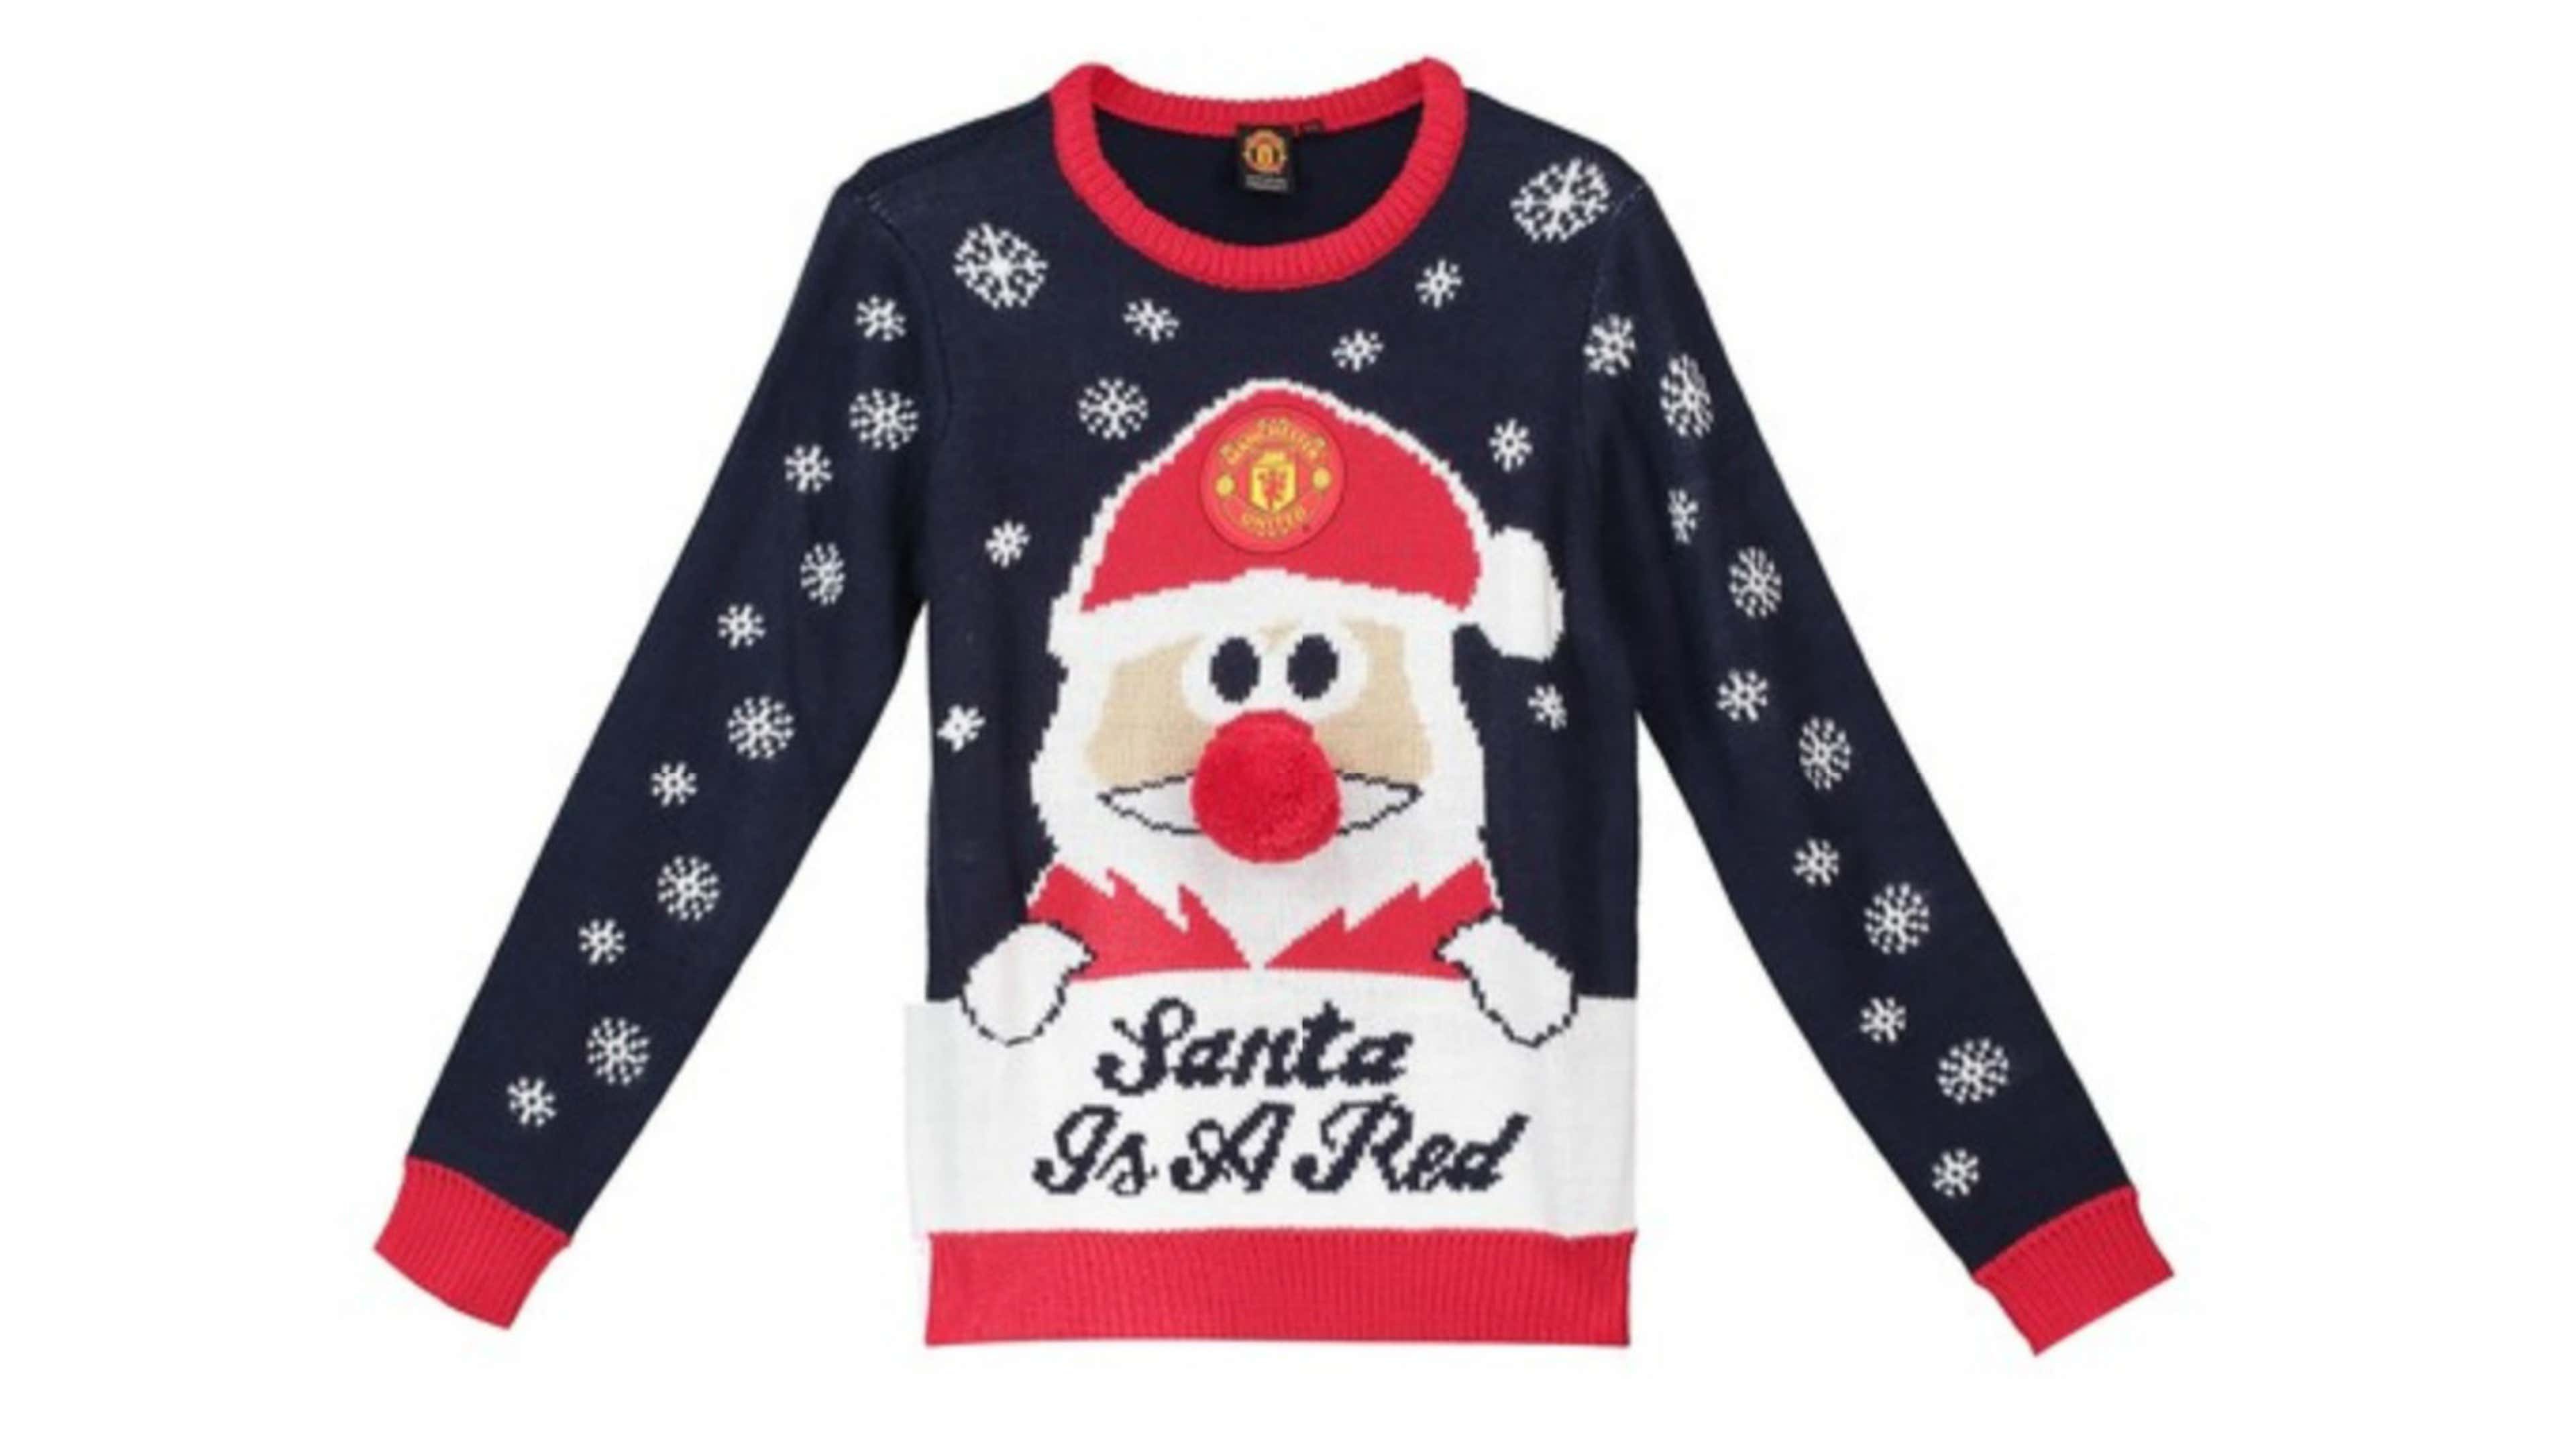 Football Christmas jumpers: All best from the Premier and the world | US